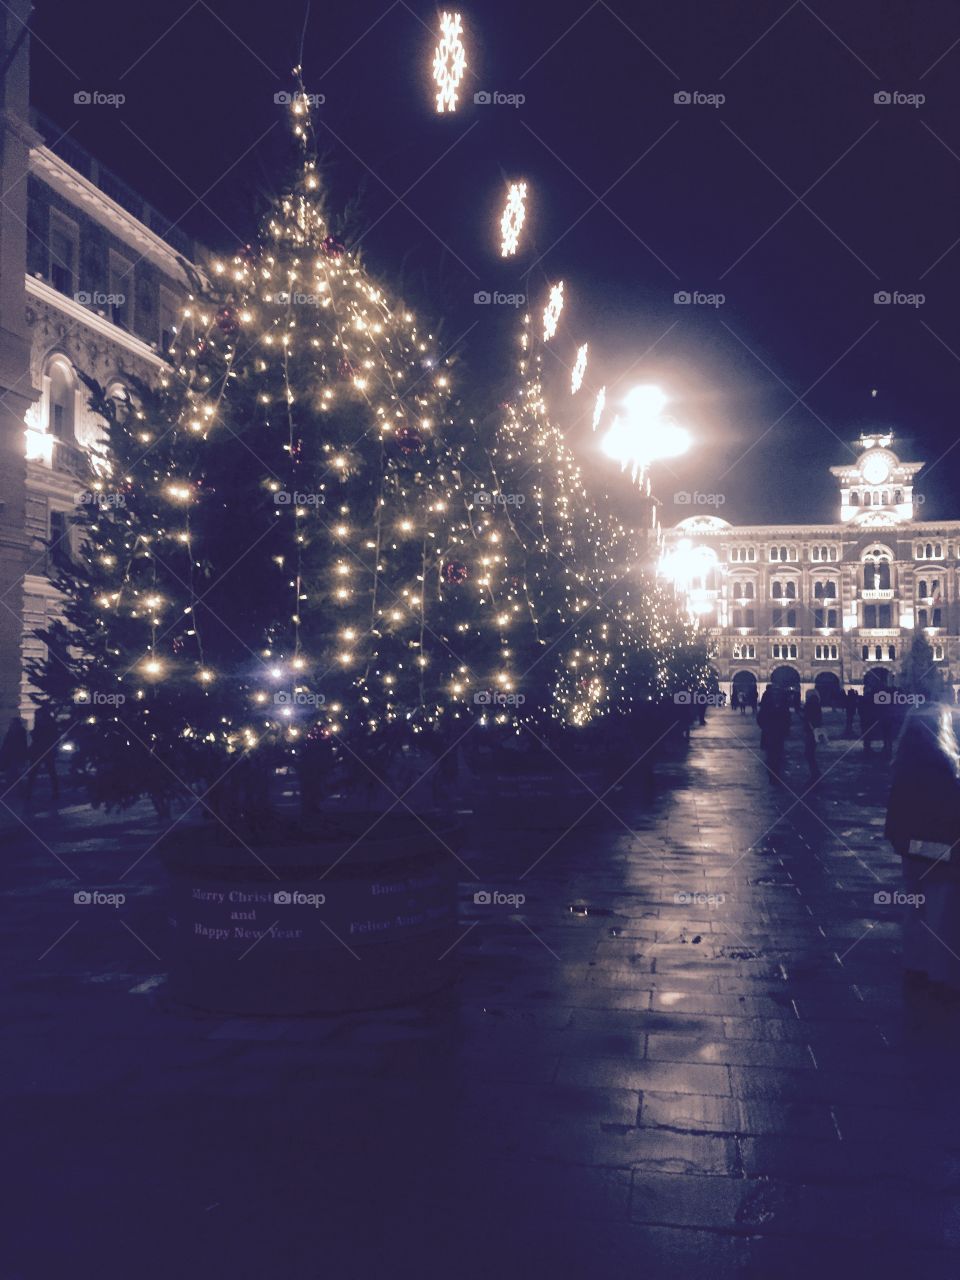 It's the most wonderful time of the year@ Italy, Trieste